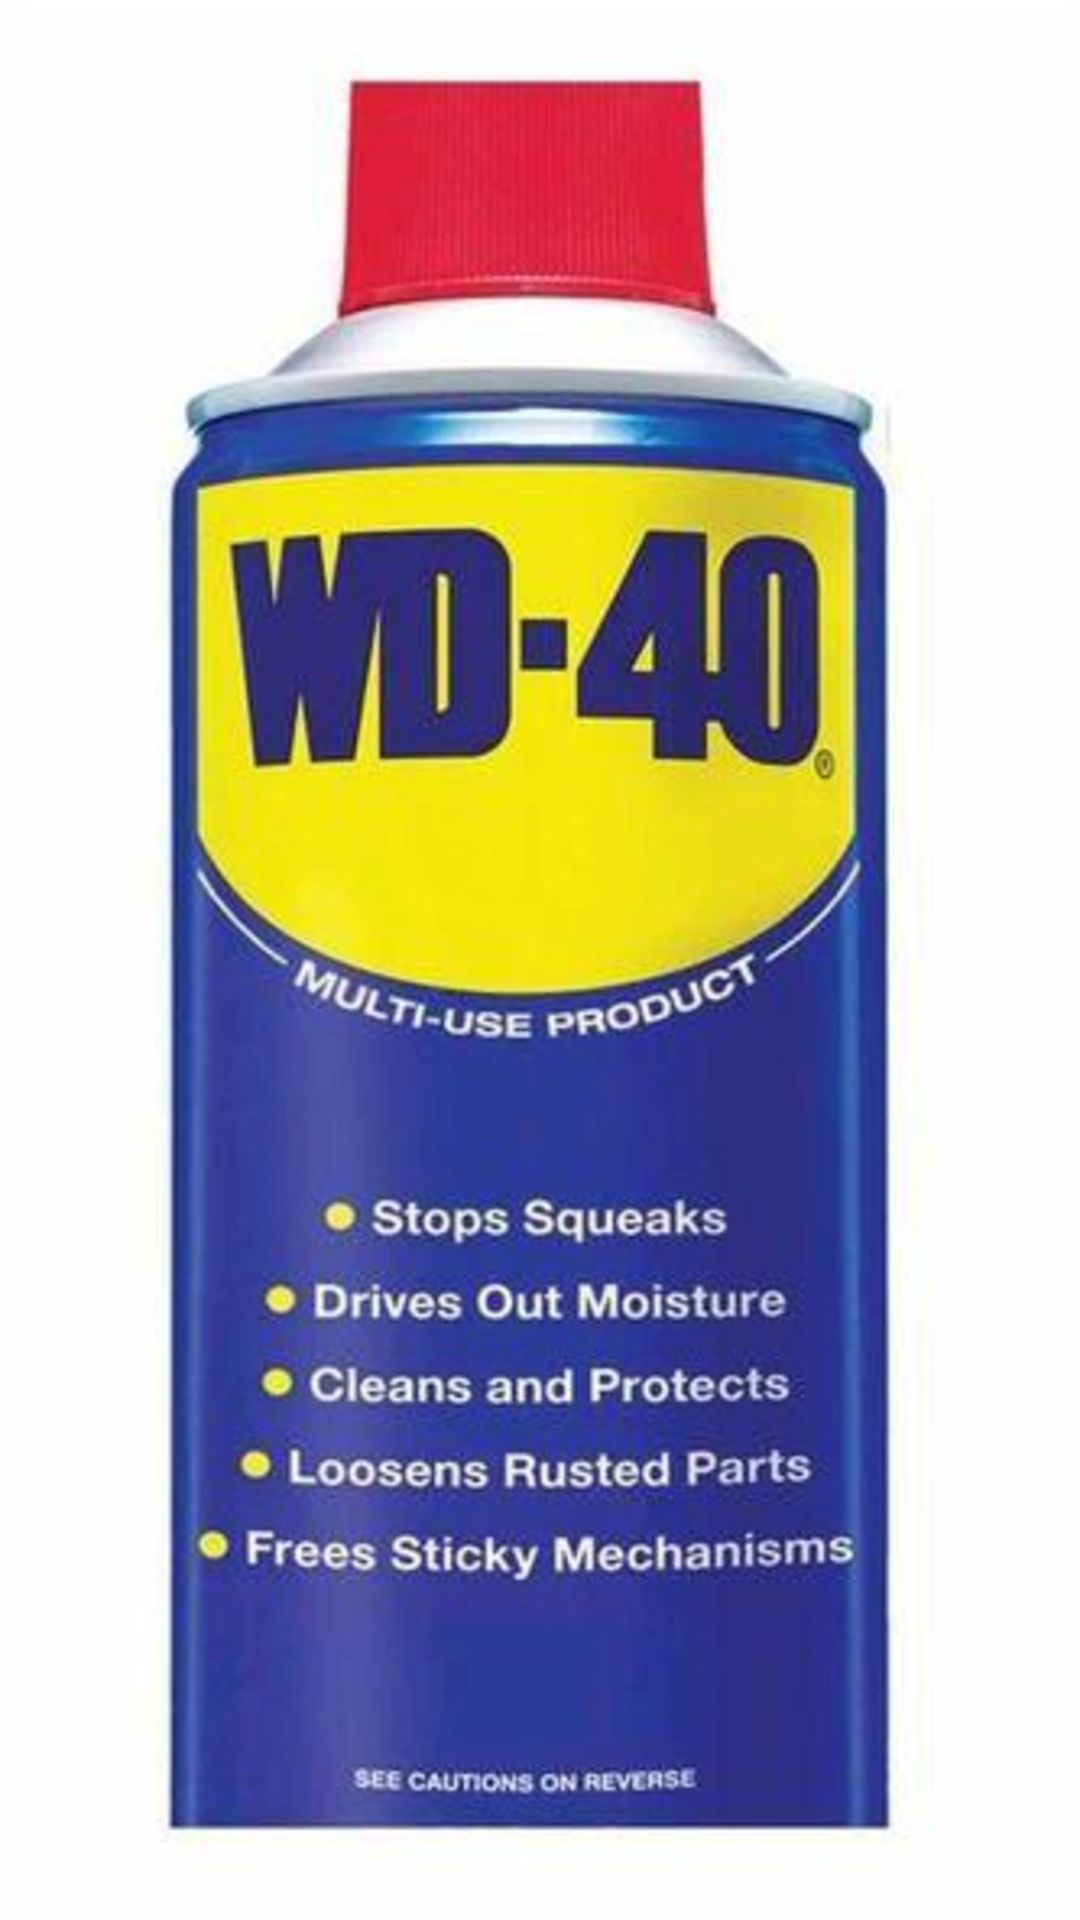 1. x lot containg 24pcs WD40 330ml new and sealed - rrp £3.75 each can